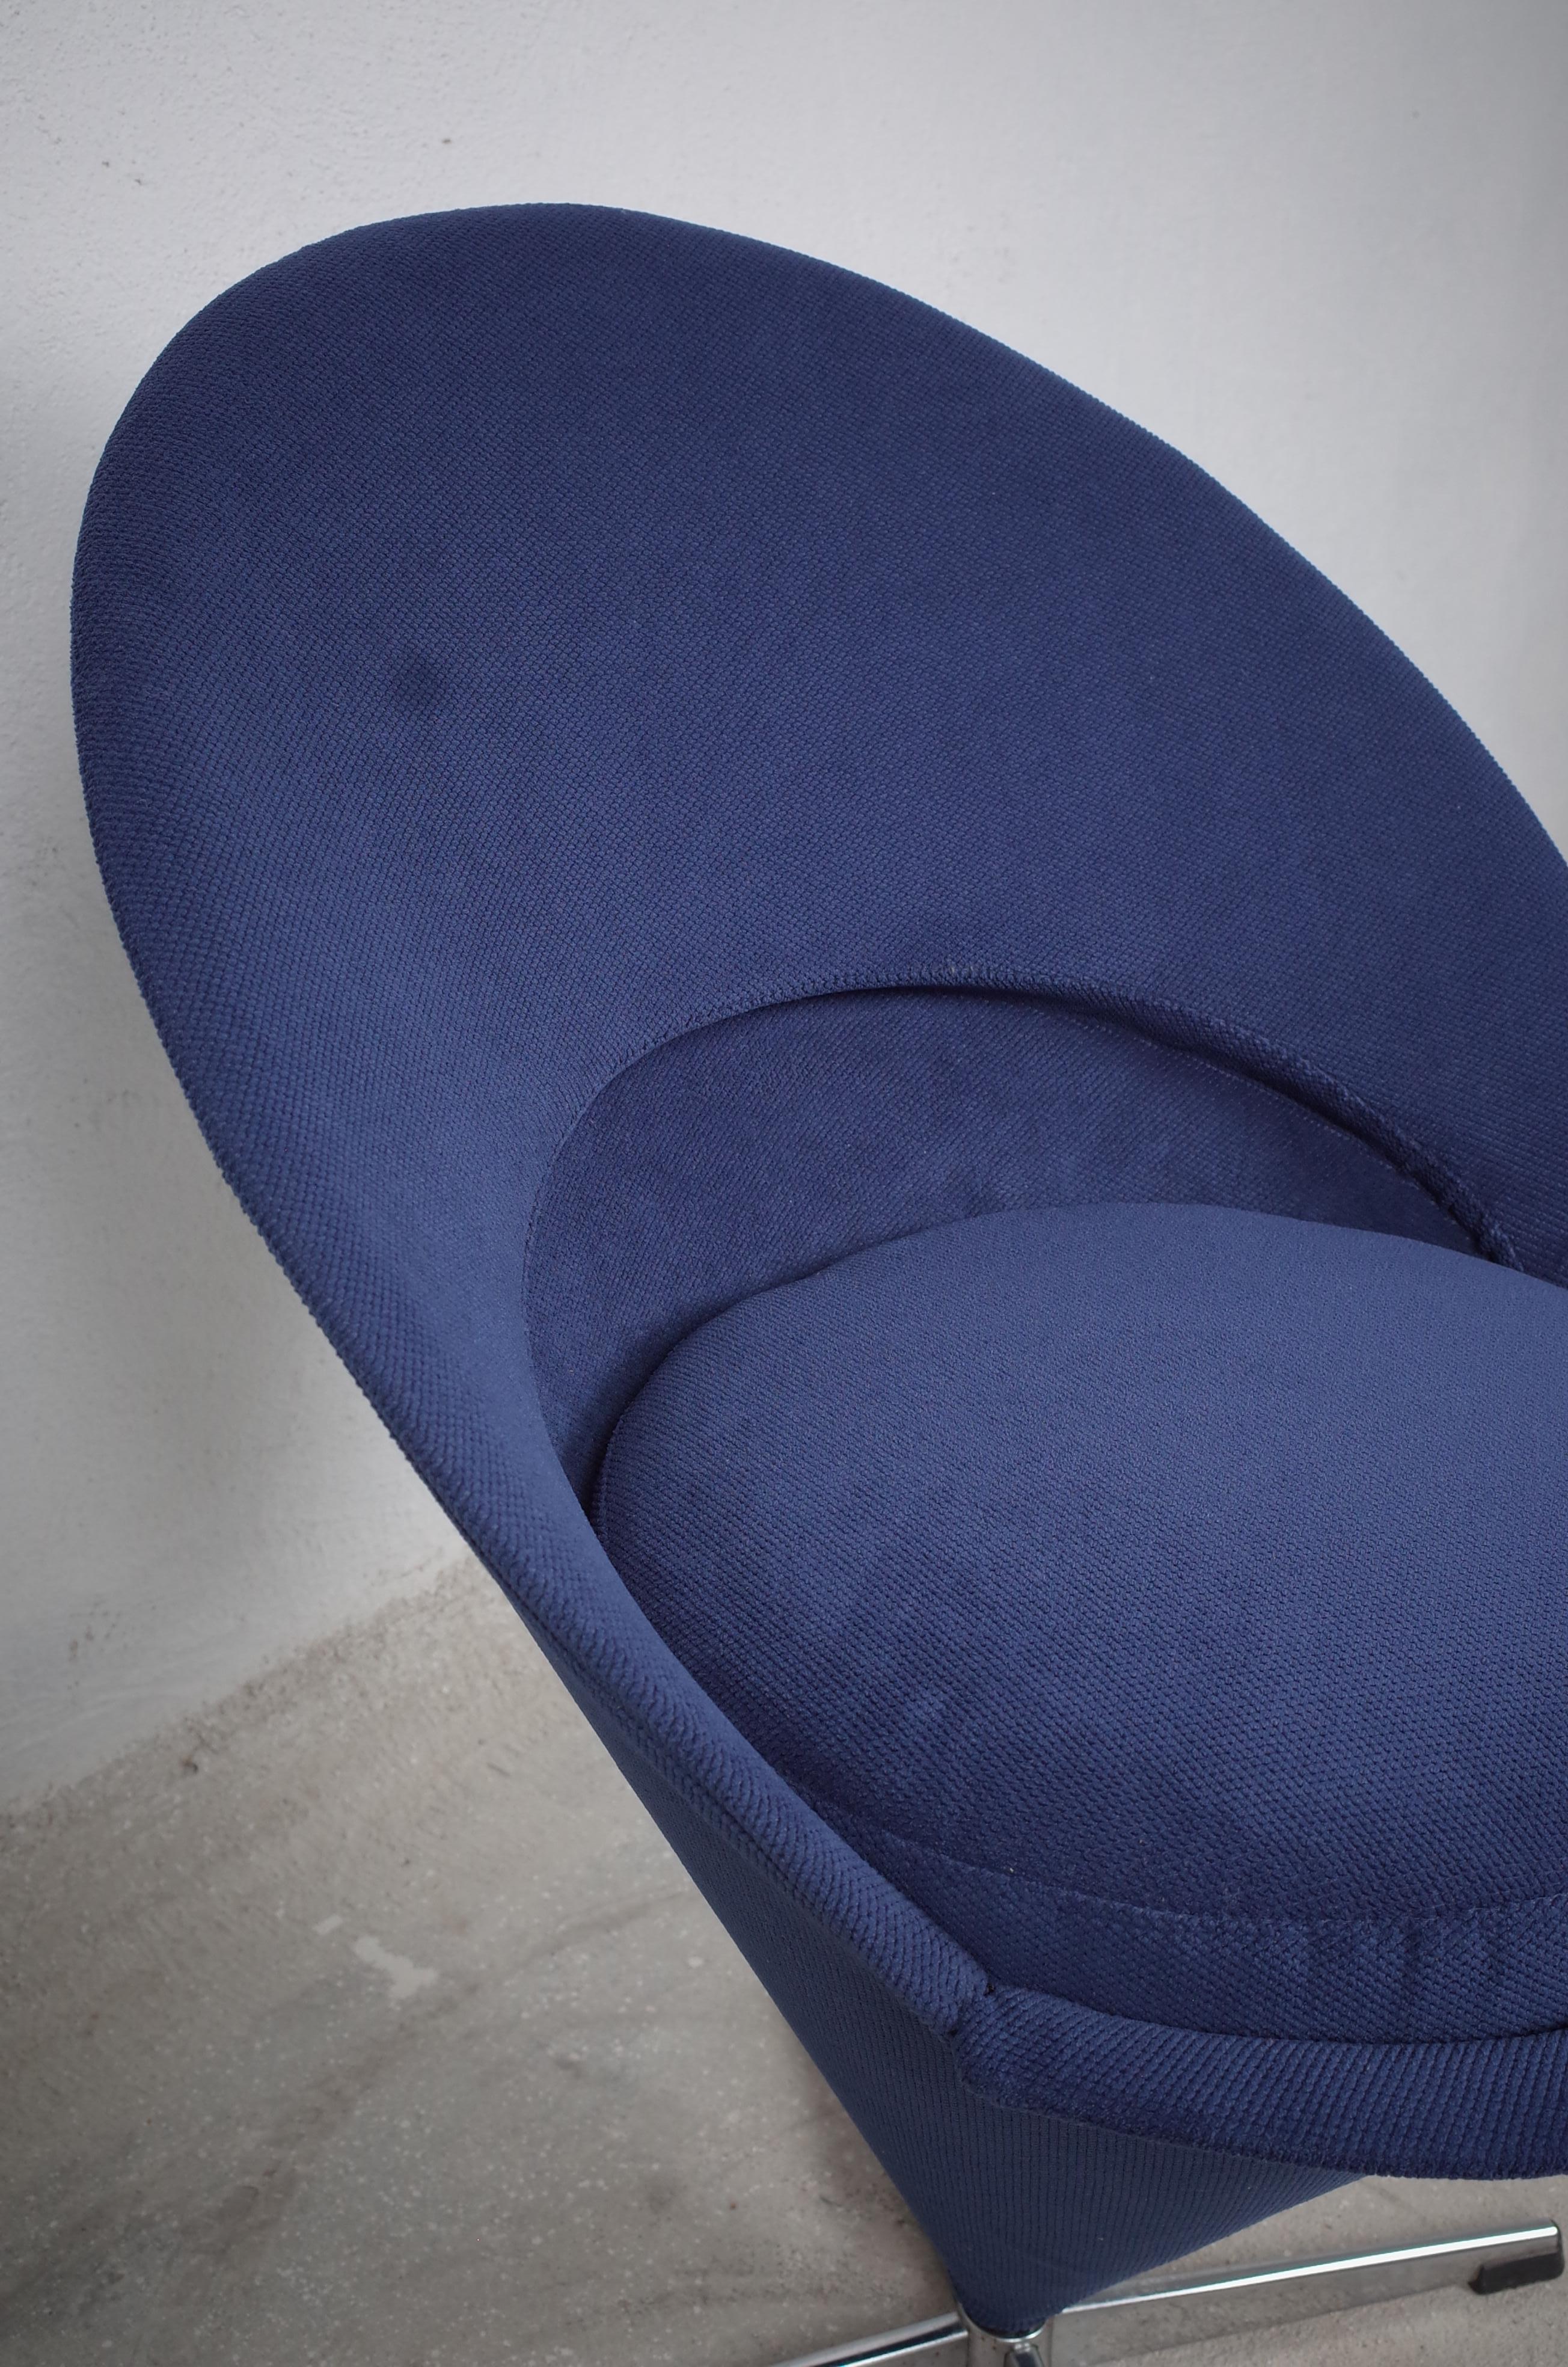 Midcentury Blue Cone Chair by Verner Panton, 1960s For Sale 1